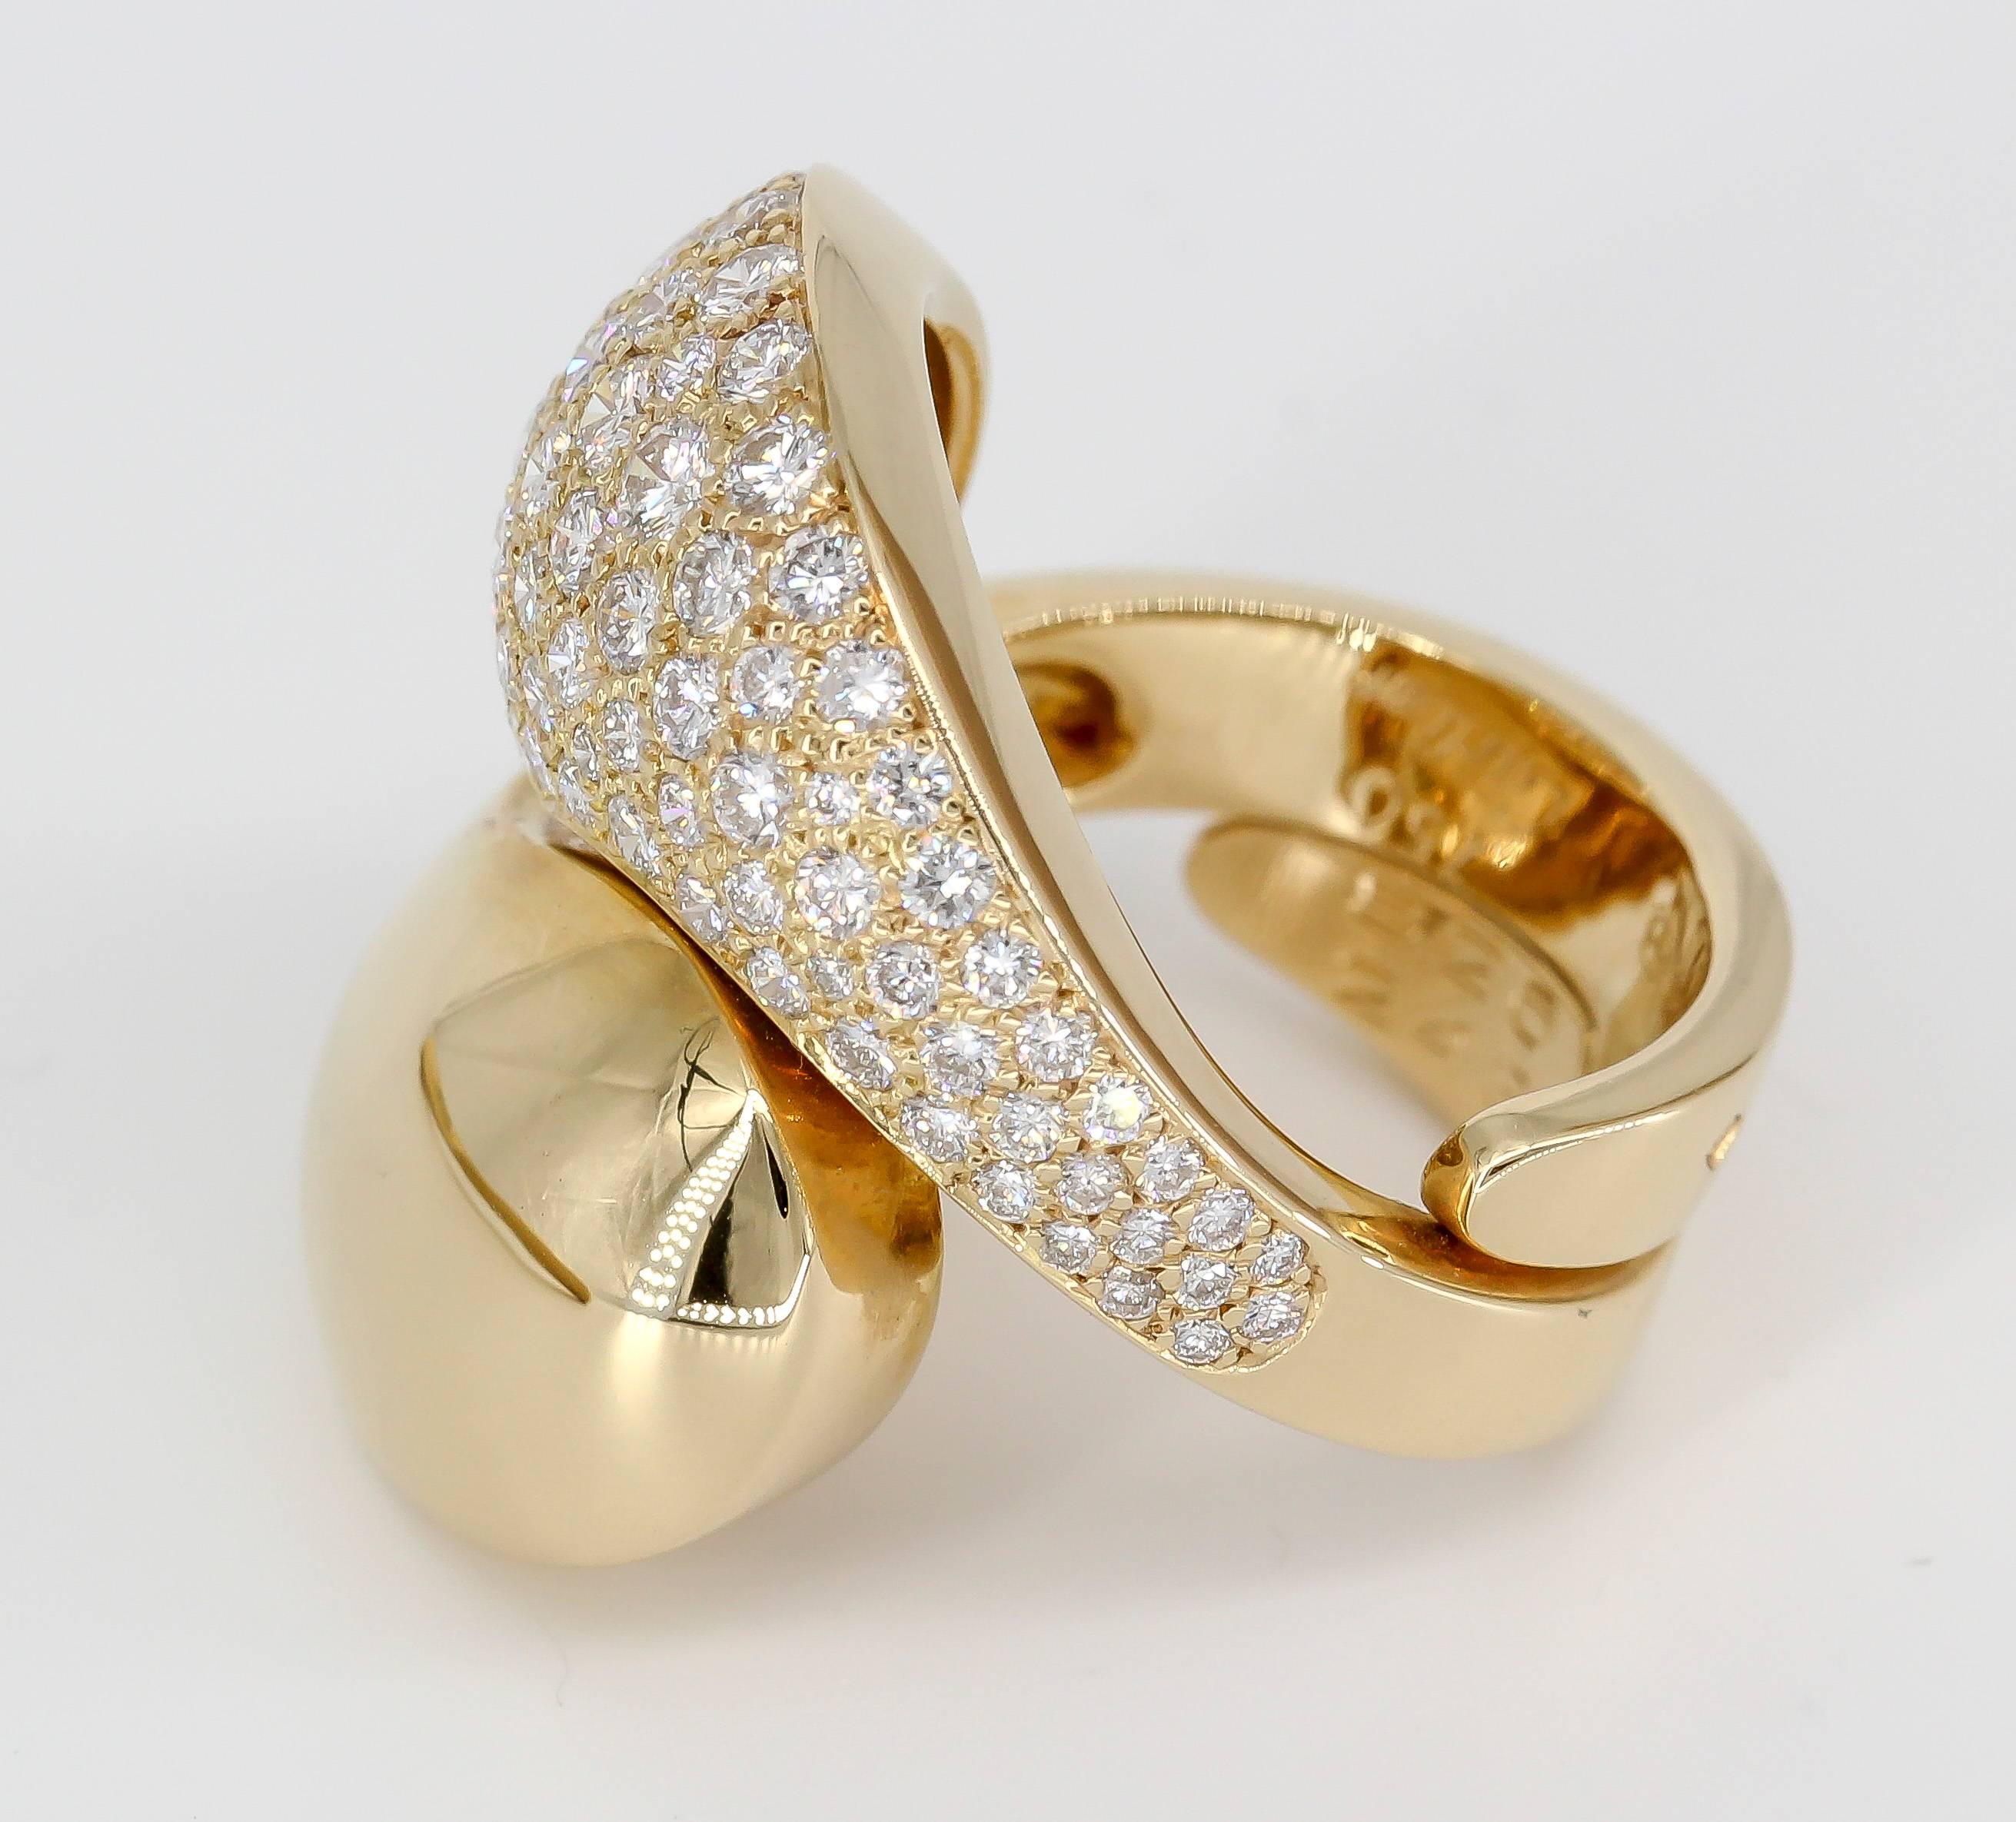 Stylish diamond and 18K yellow gold ring by Cartier. It has a "Yin Yang" motif. Features high grade round brilliant cut diamonds throughout one side. Beautiful workmanship and easy to wear anywhere. European size 48.

Hallmarks: Cartier,